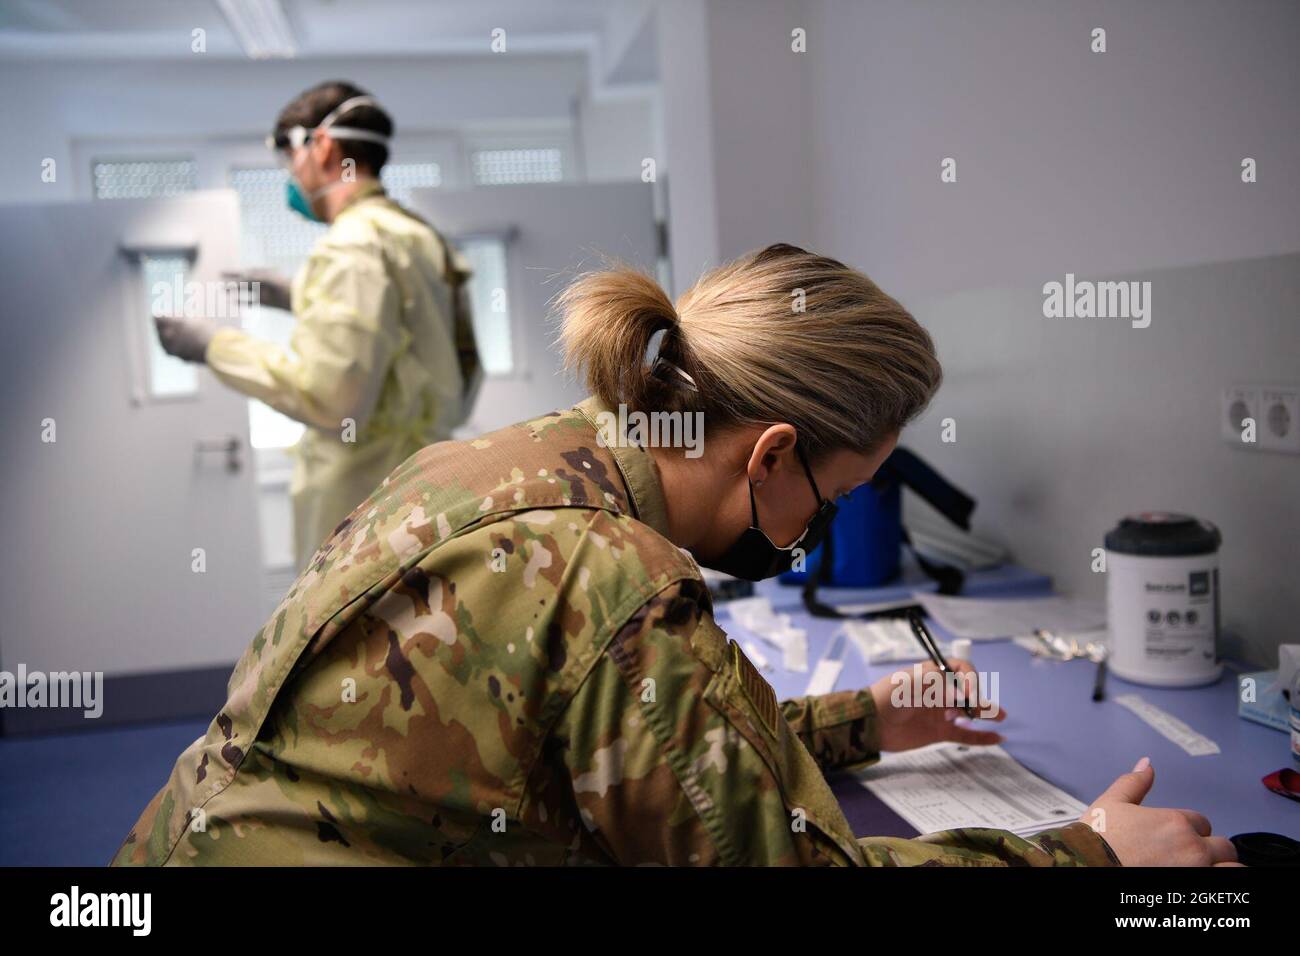 U.S. Air Force Senior Airman Kristen Nicola, 52nd Medical Group Public Health technician (front), prepares Covid test paperwork as U.S. Air Force Staff Sgt. Paul Hukreide, 52nd Medical Group Warriors Operational Health Clinic NCO in charge, prepares to administer a Covid test at Spangdahlem Air Base Germany, April 1, 2021. For Covid testing, some of the duties Public Health is responsible for is  interviewing, screening, and contact tracing patients. Stock Photo